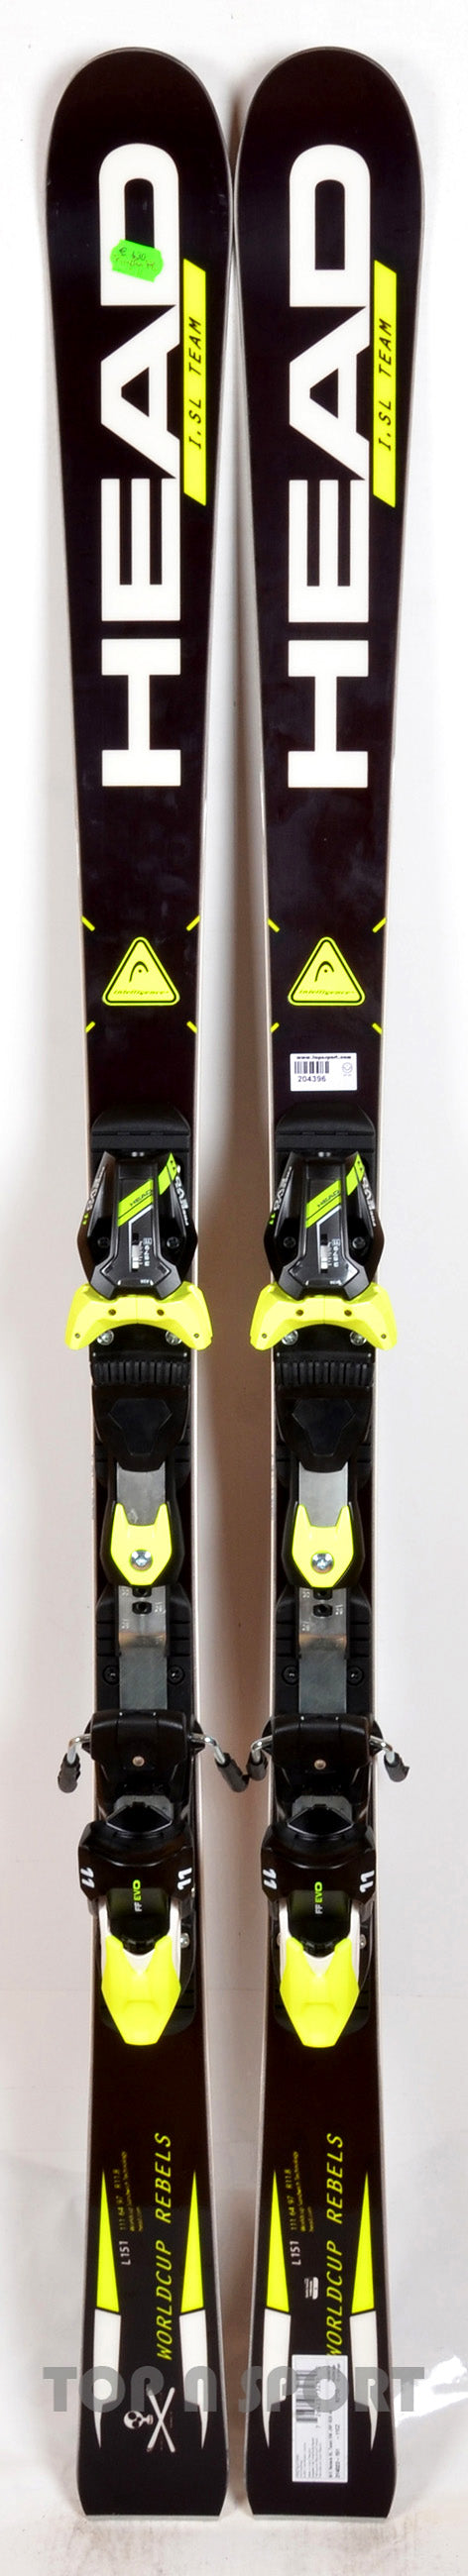 Pack neuf skis Head WORLDCUP REBELS I.SL Team avec fixations - neuf déstockage